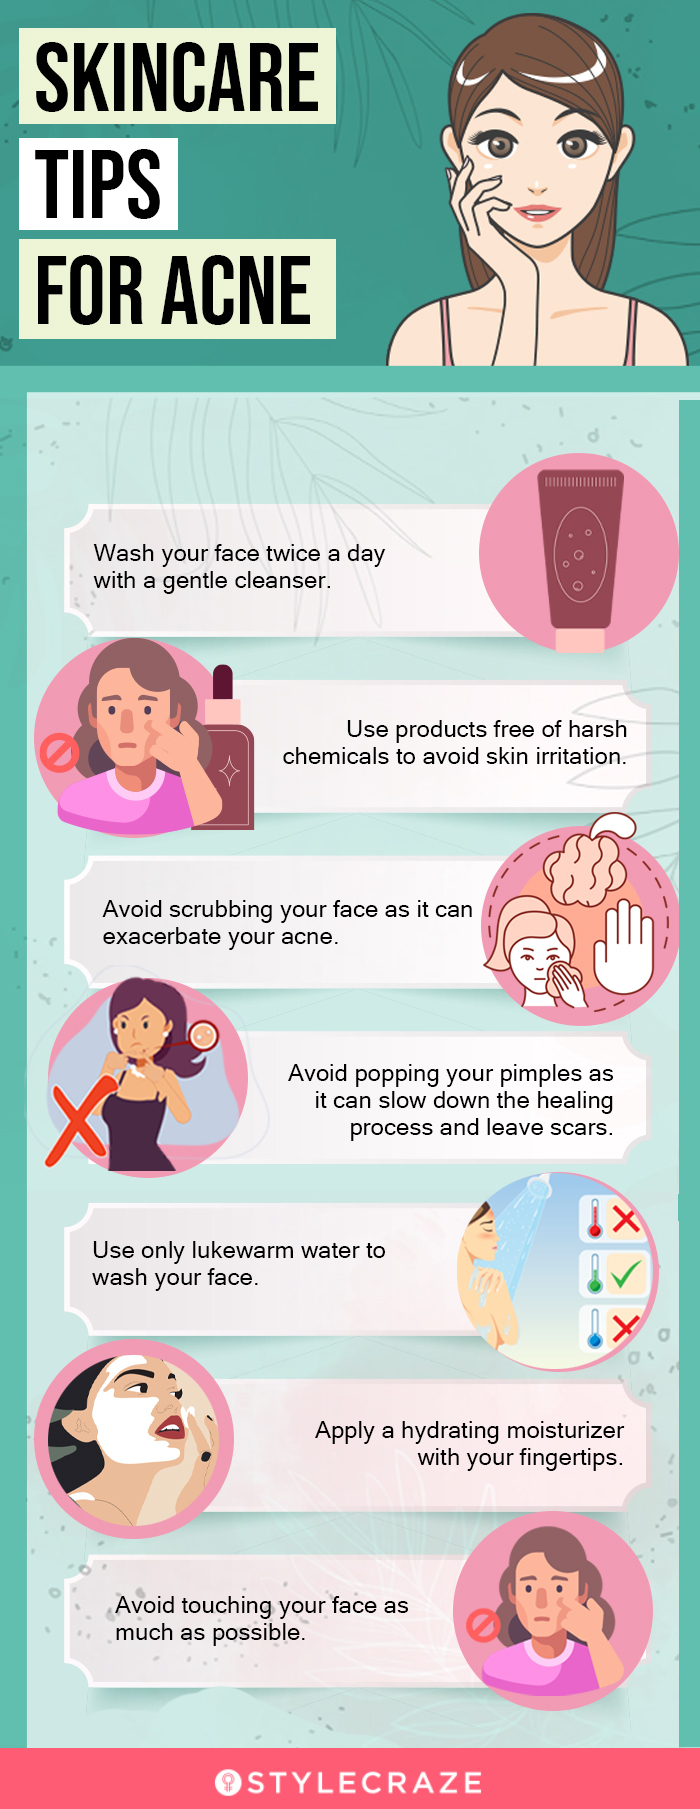 skincare tips for acne [infographic]